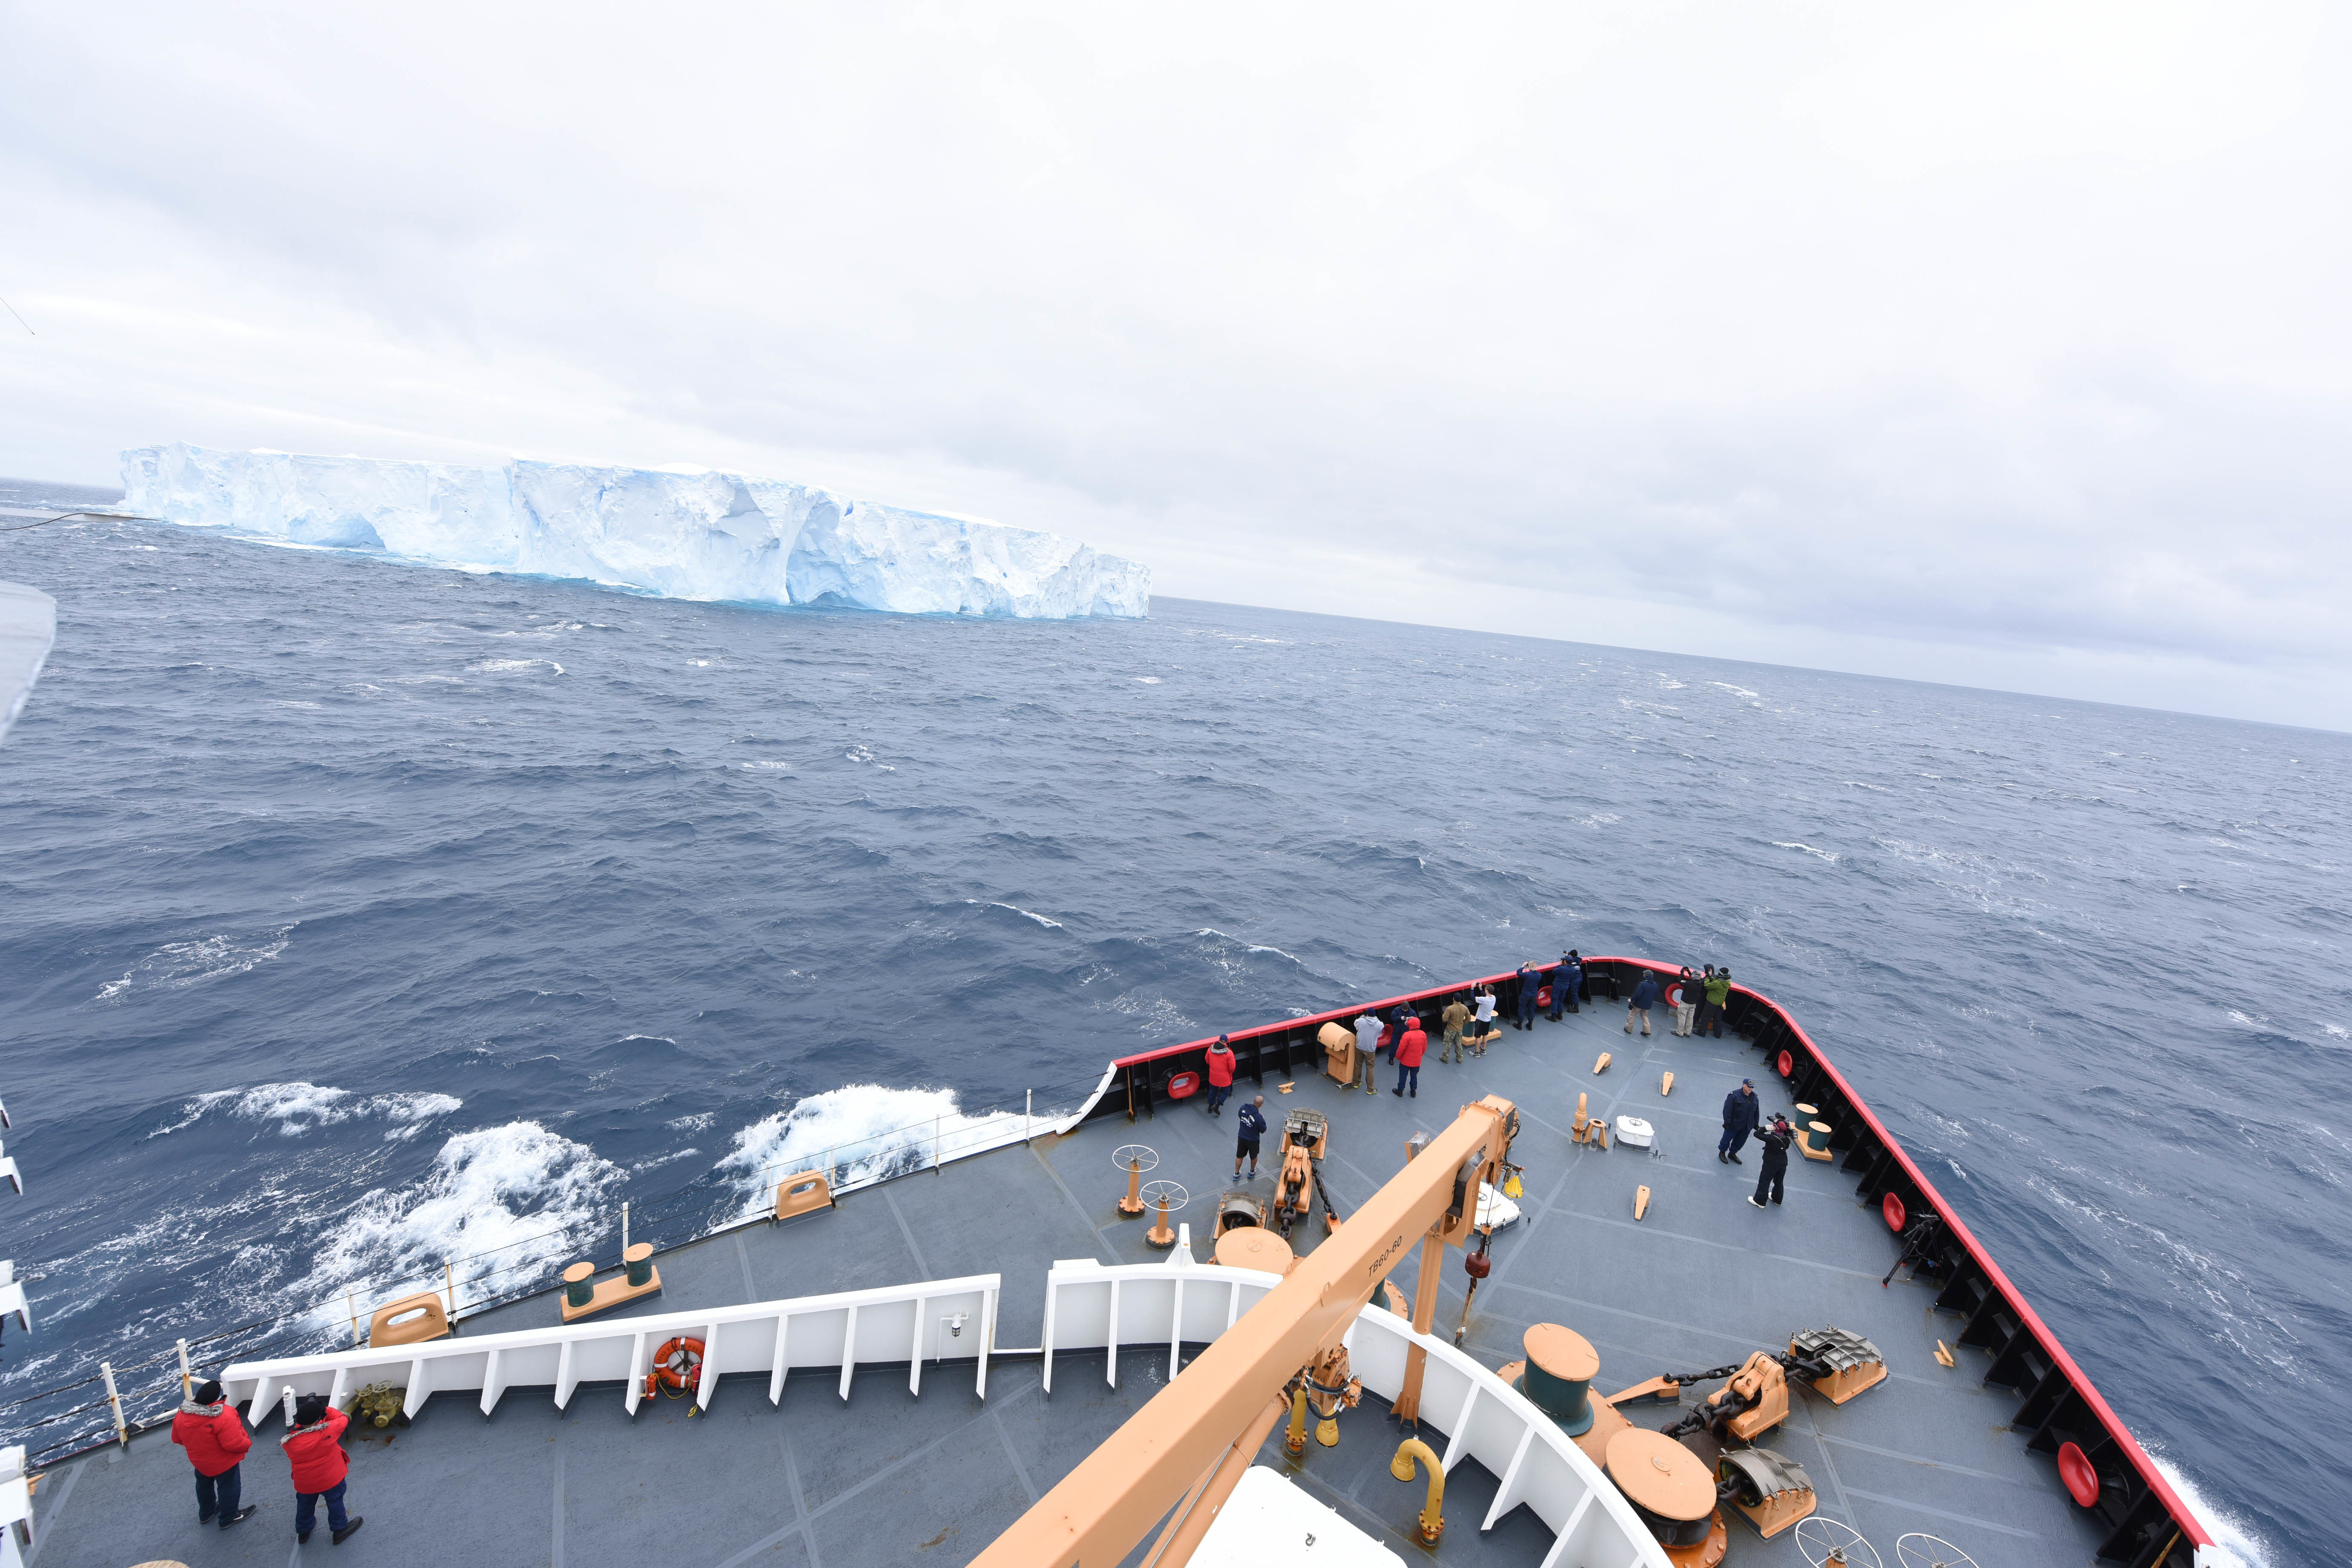 Passengers and the crew of CGC Polar Star gather to observe their first encounter with ice during Operation Deep Freeze 2016 in the Southern Ocean Jan. 3, 2016. The mission to resupply the National Science Foundation’s McMurdo Station, Antarctica, is one of the most difficult U.S. military peacetime missions due to the harsh environment. US Coast Guard photo.